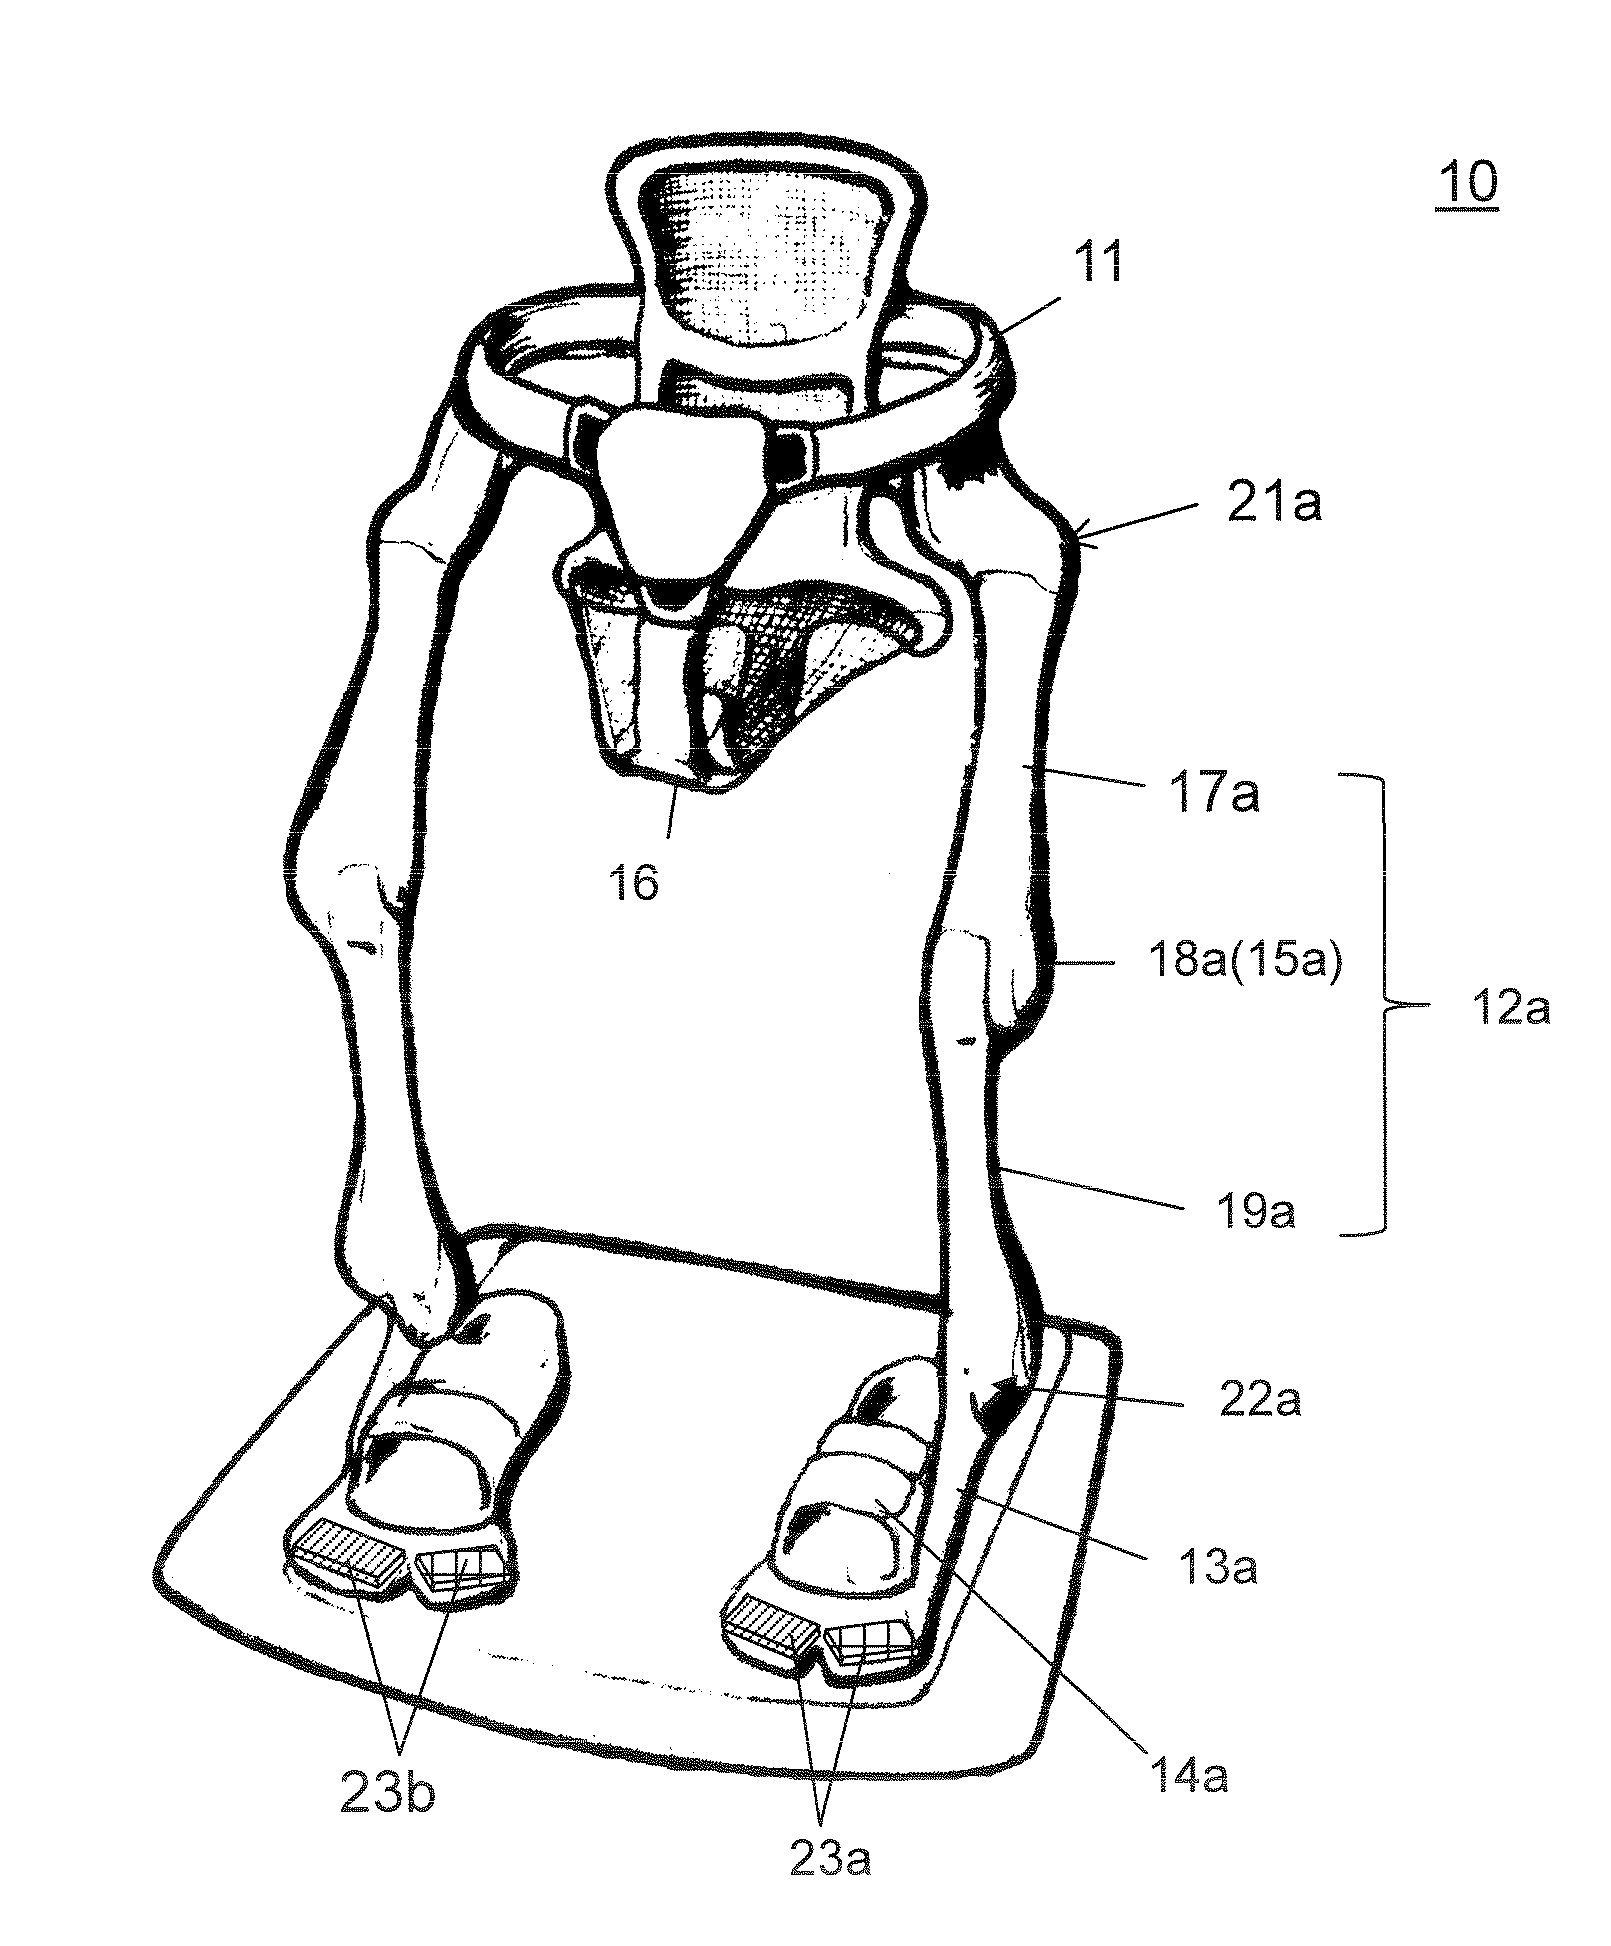 Working posture holding device